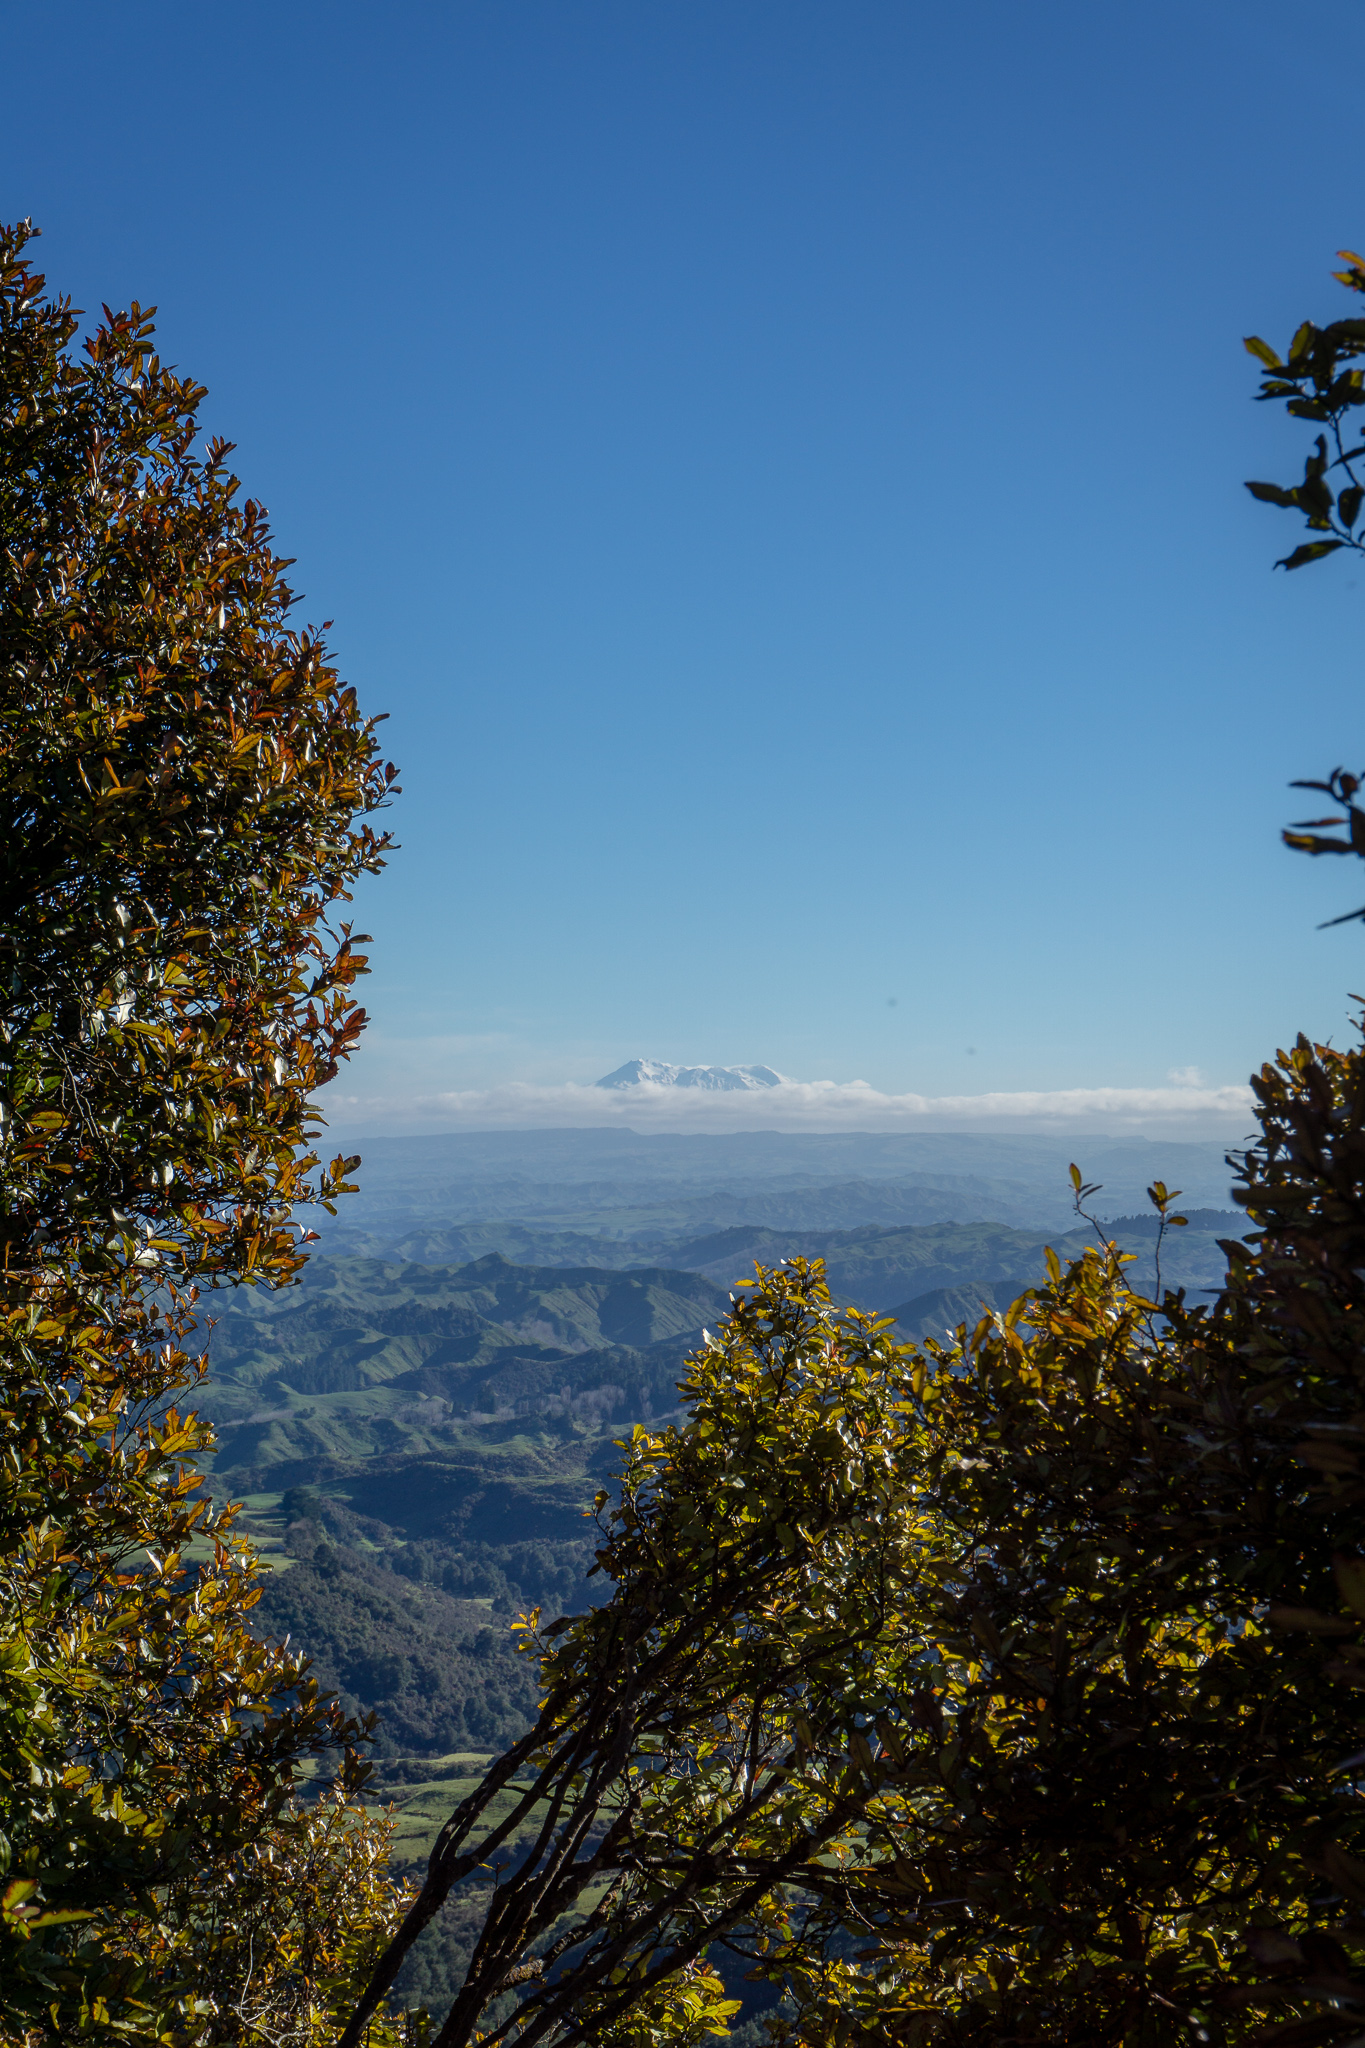 View of a far off snowy Mt Ruapehu covered in cloud, and framed by autumn trees